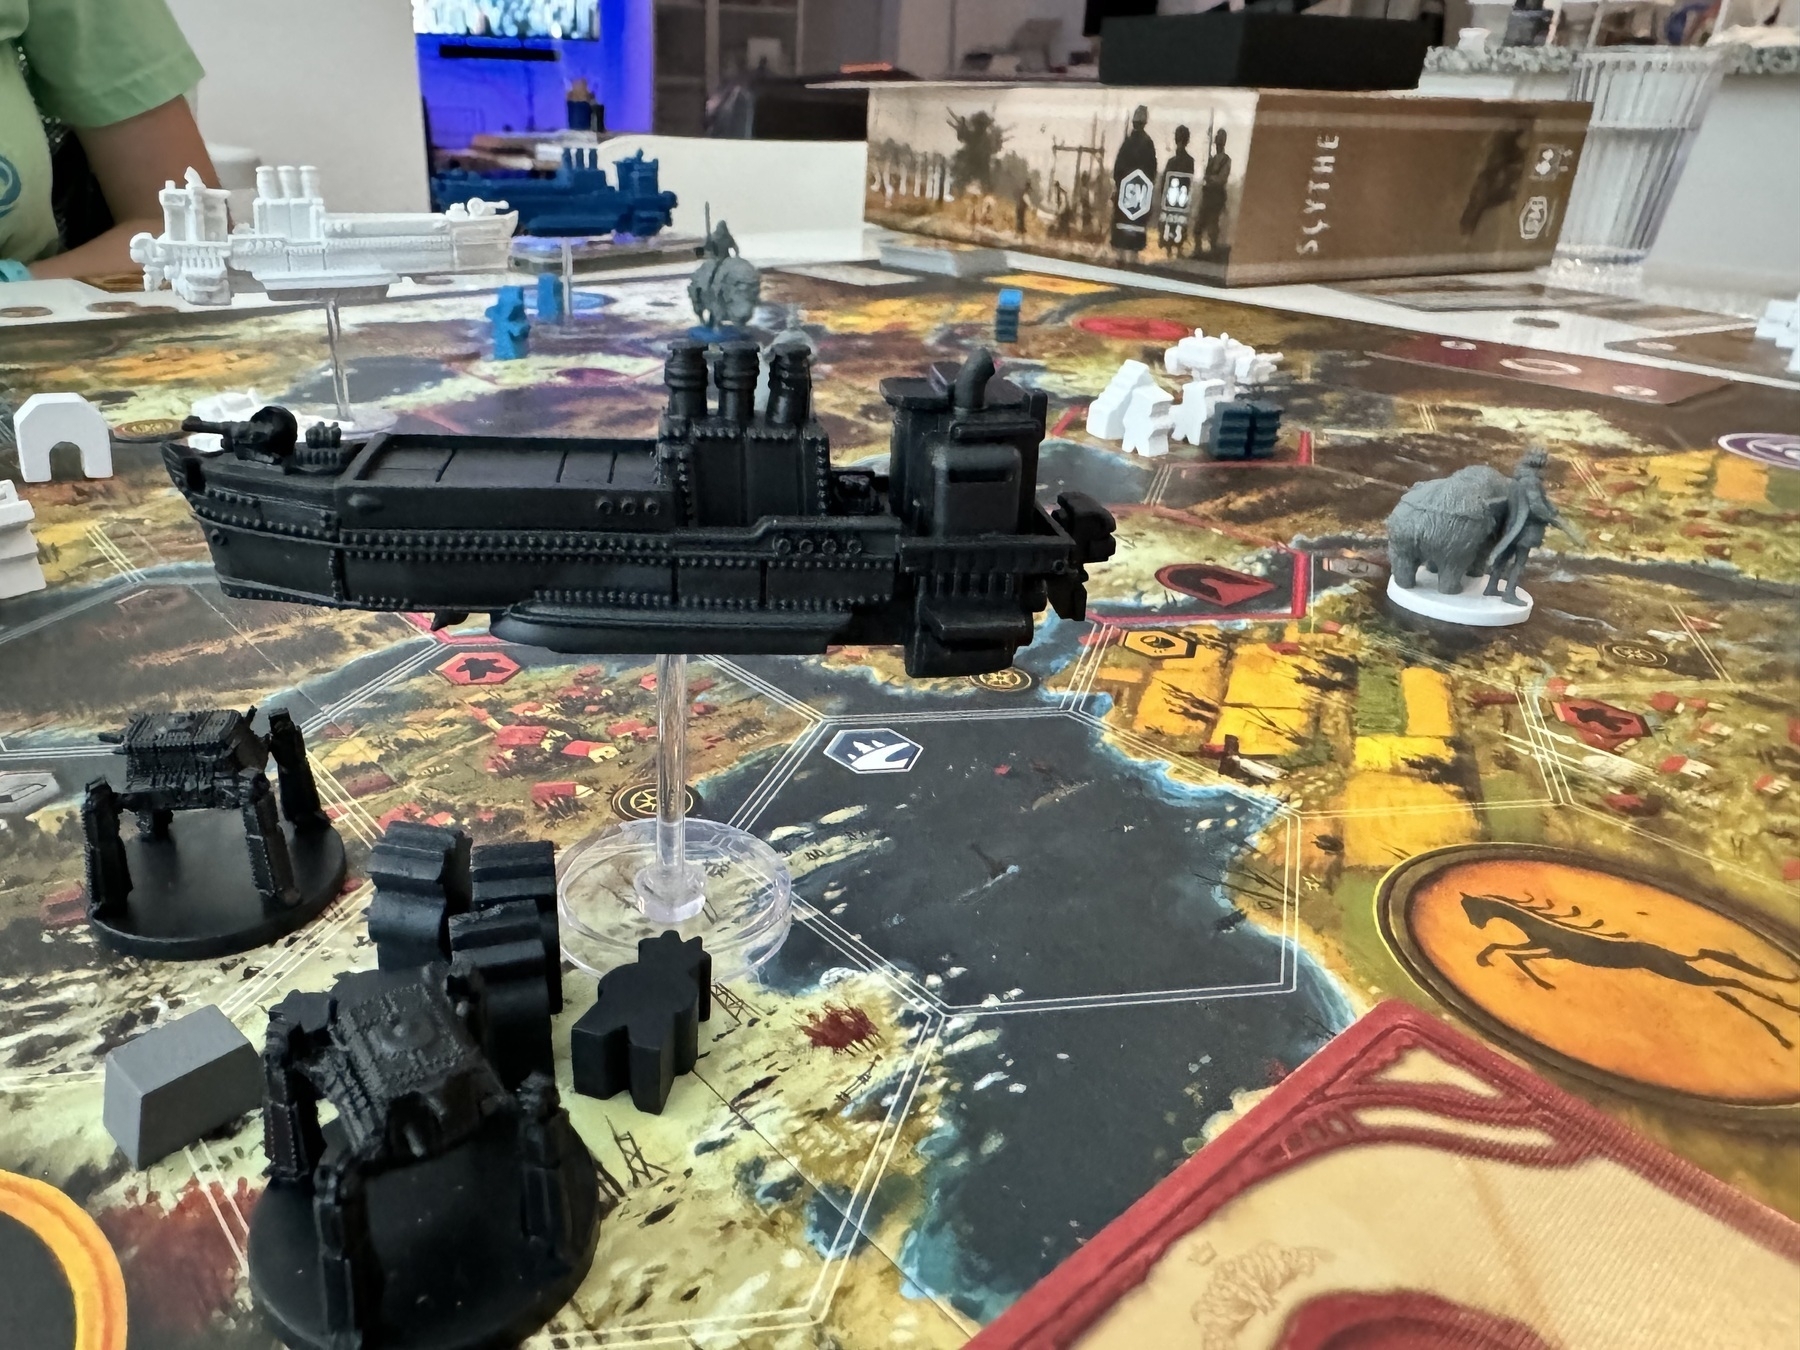 Scythe board game with The Wind Gambit expansion